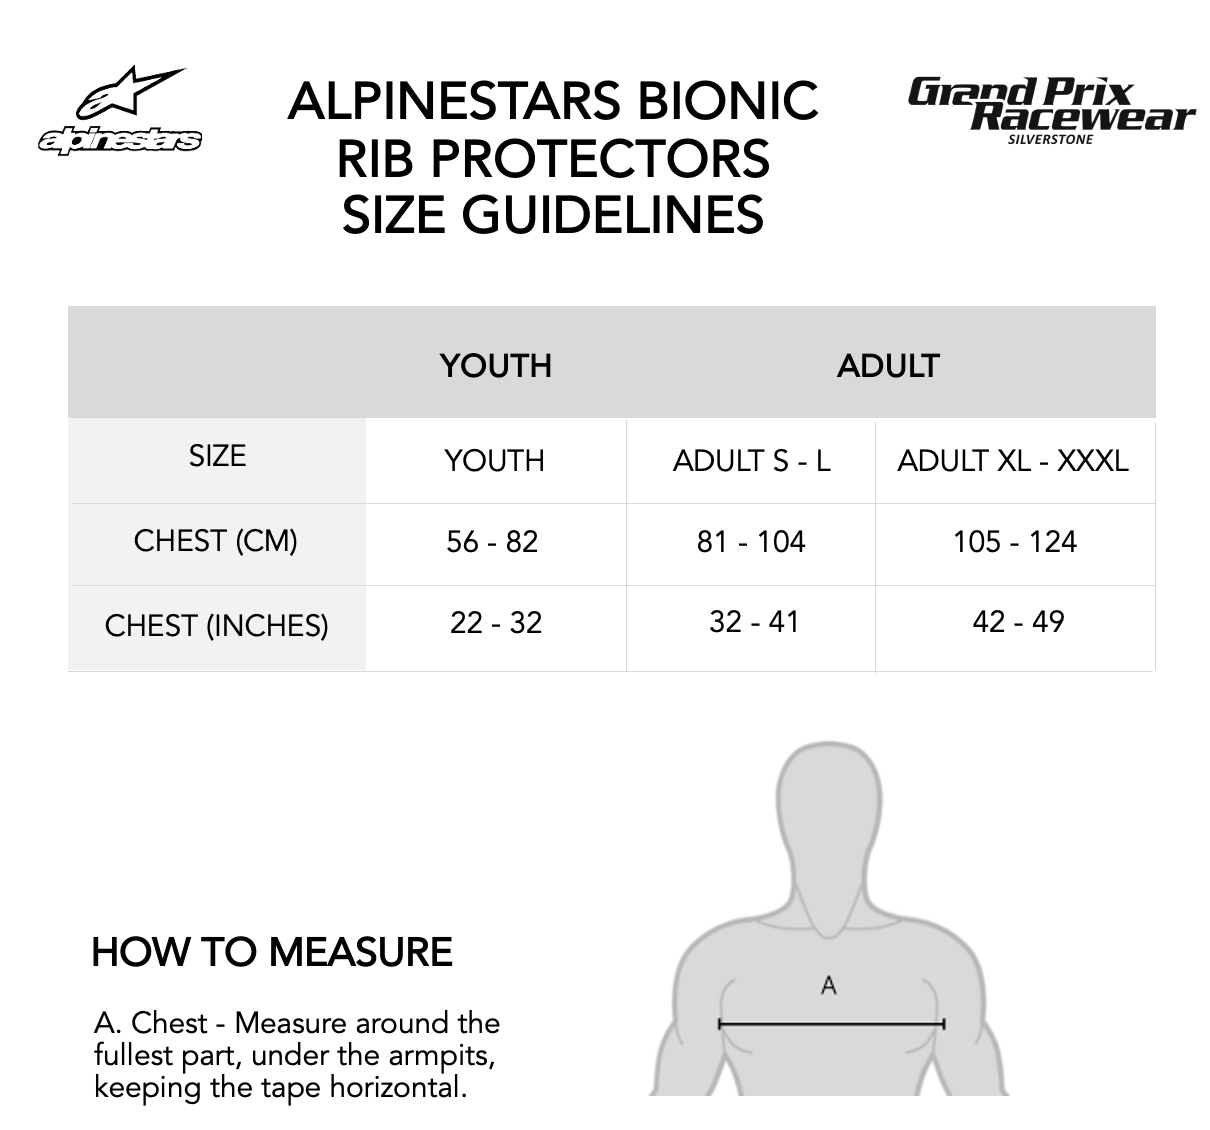 Size Guide for Alpinestars Bionic Rib Protectors available from www.gprdirect.com